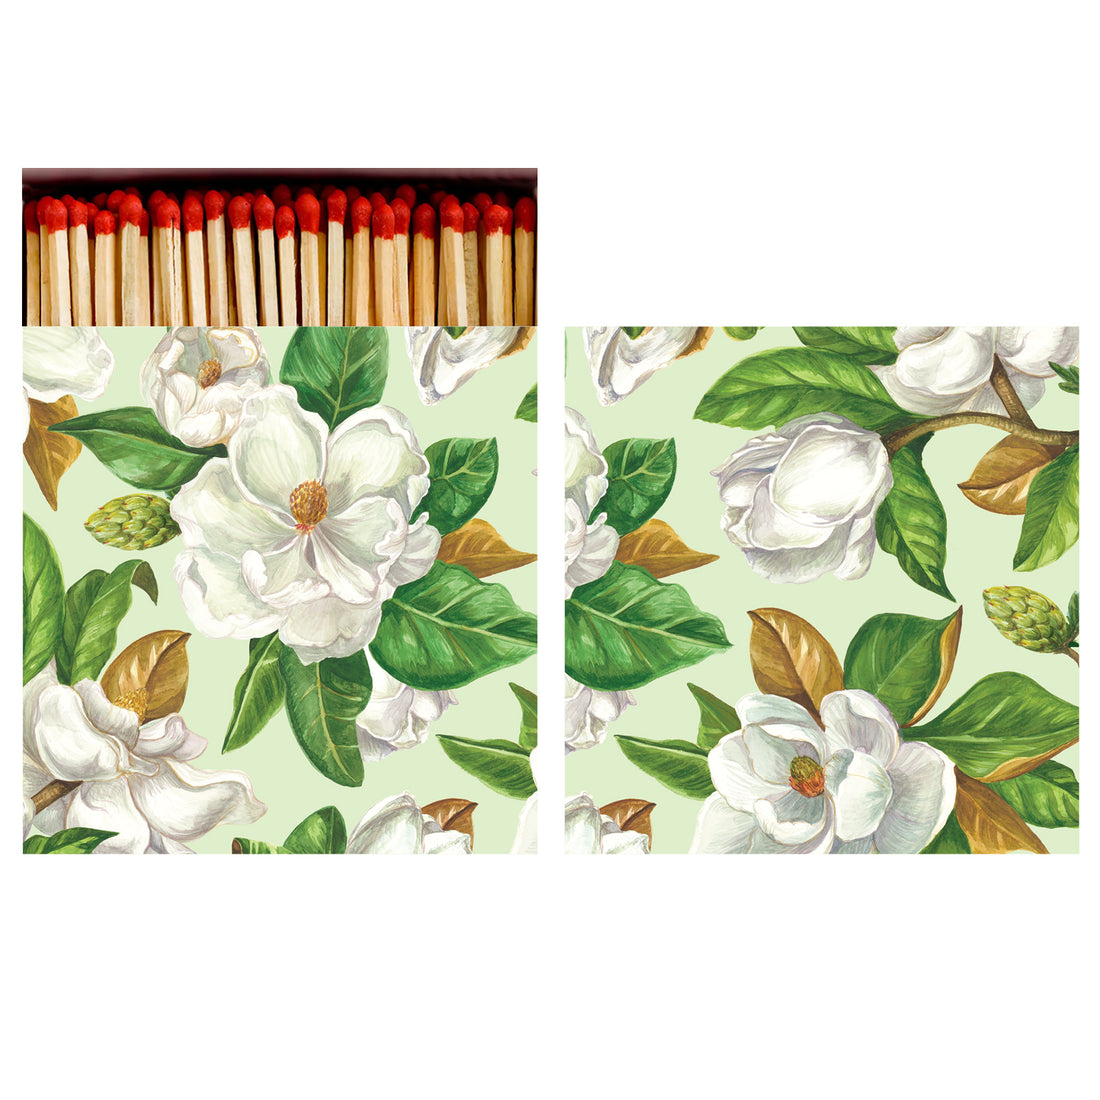 Two sides of a square match box, the left of which is open slightly to reveal the matches inside. The artwork on the box depicts a wall-to-wall pattern of big white magnolia blooms with dark green and brown leaves scattered over the mint green background.